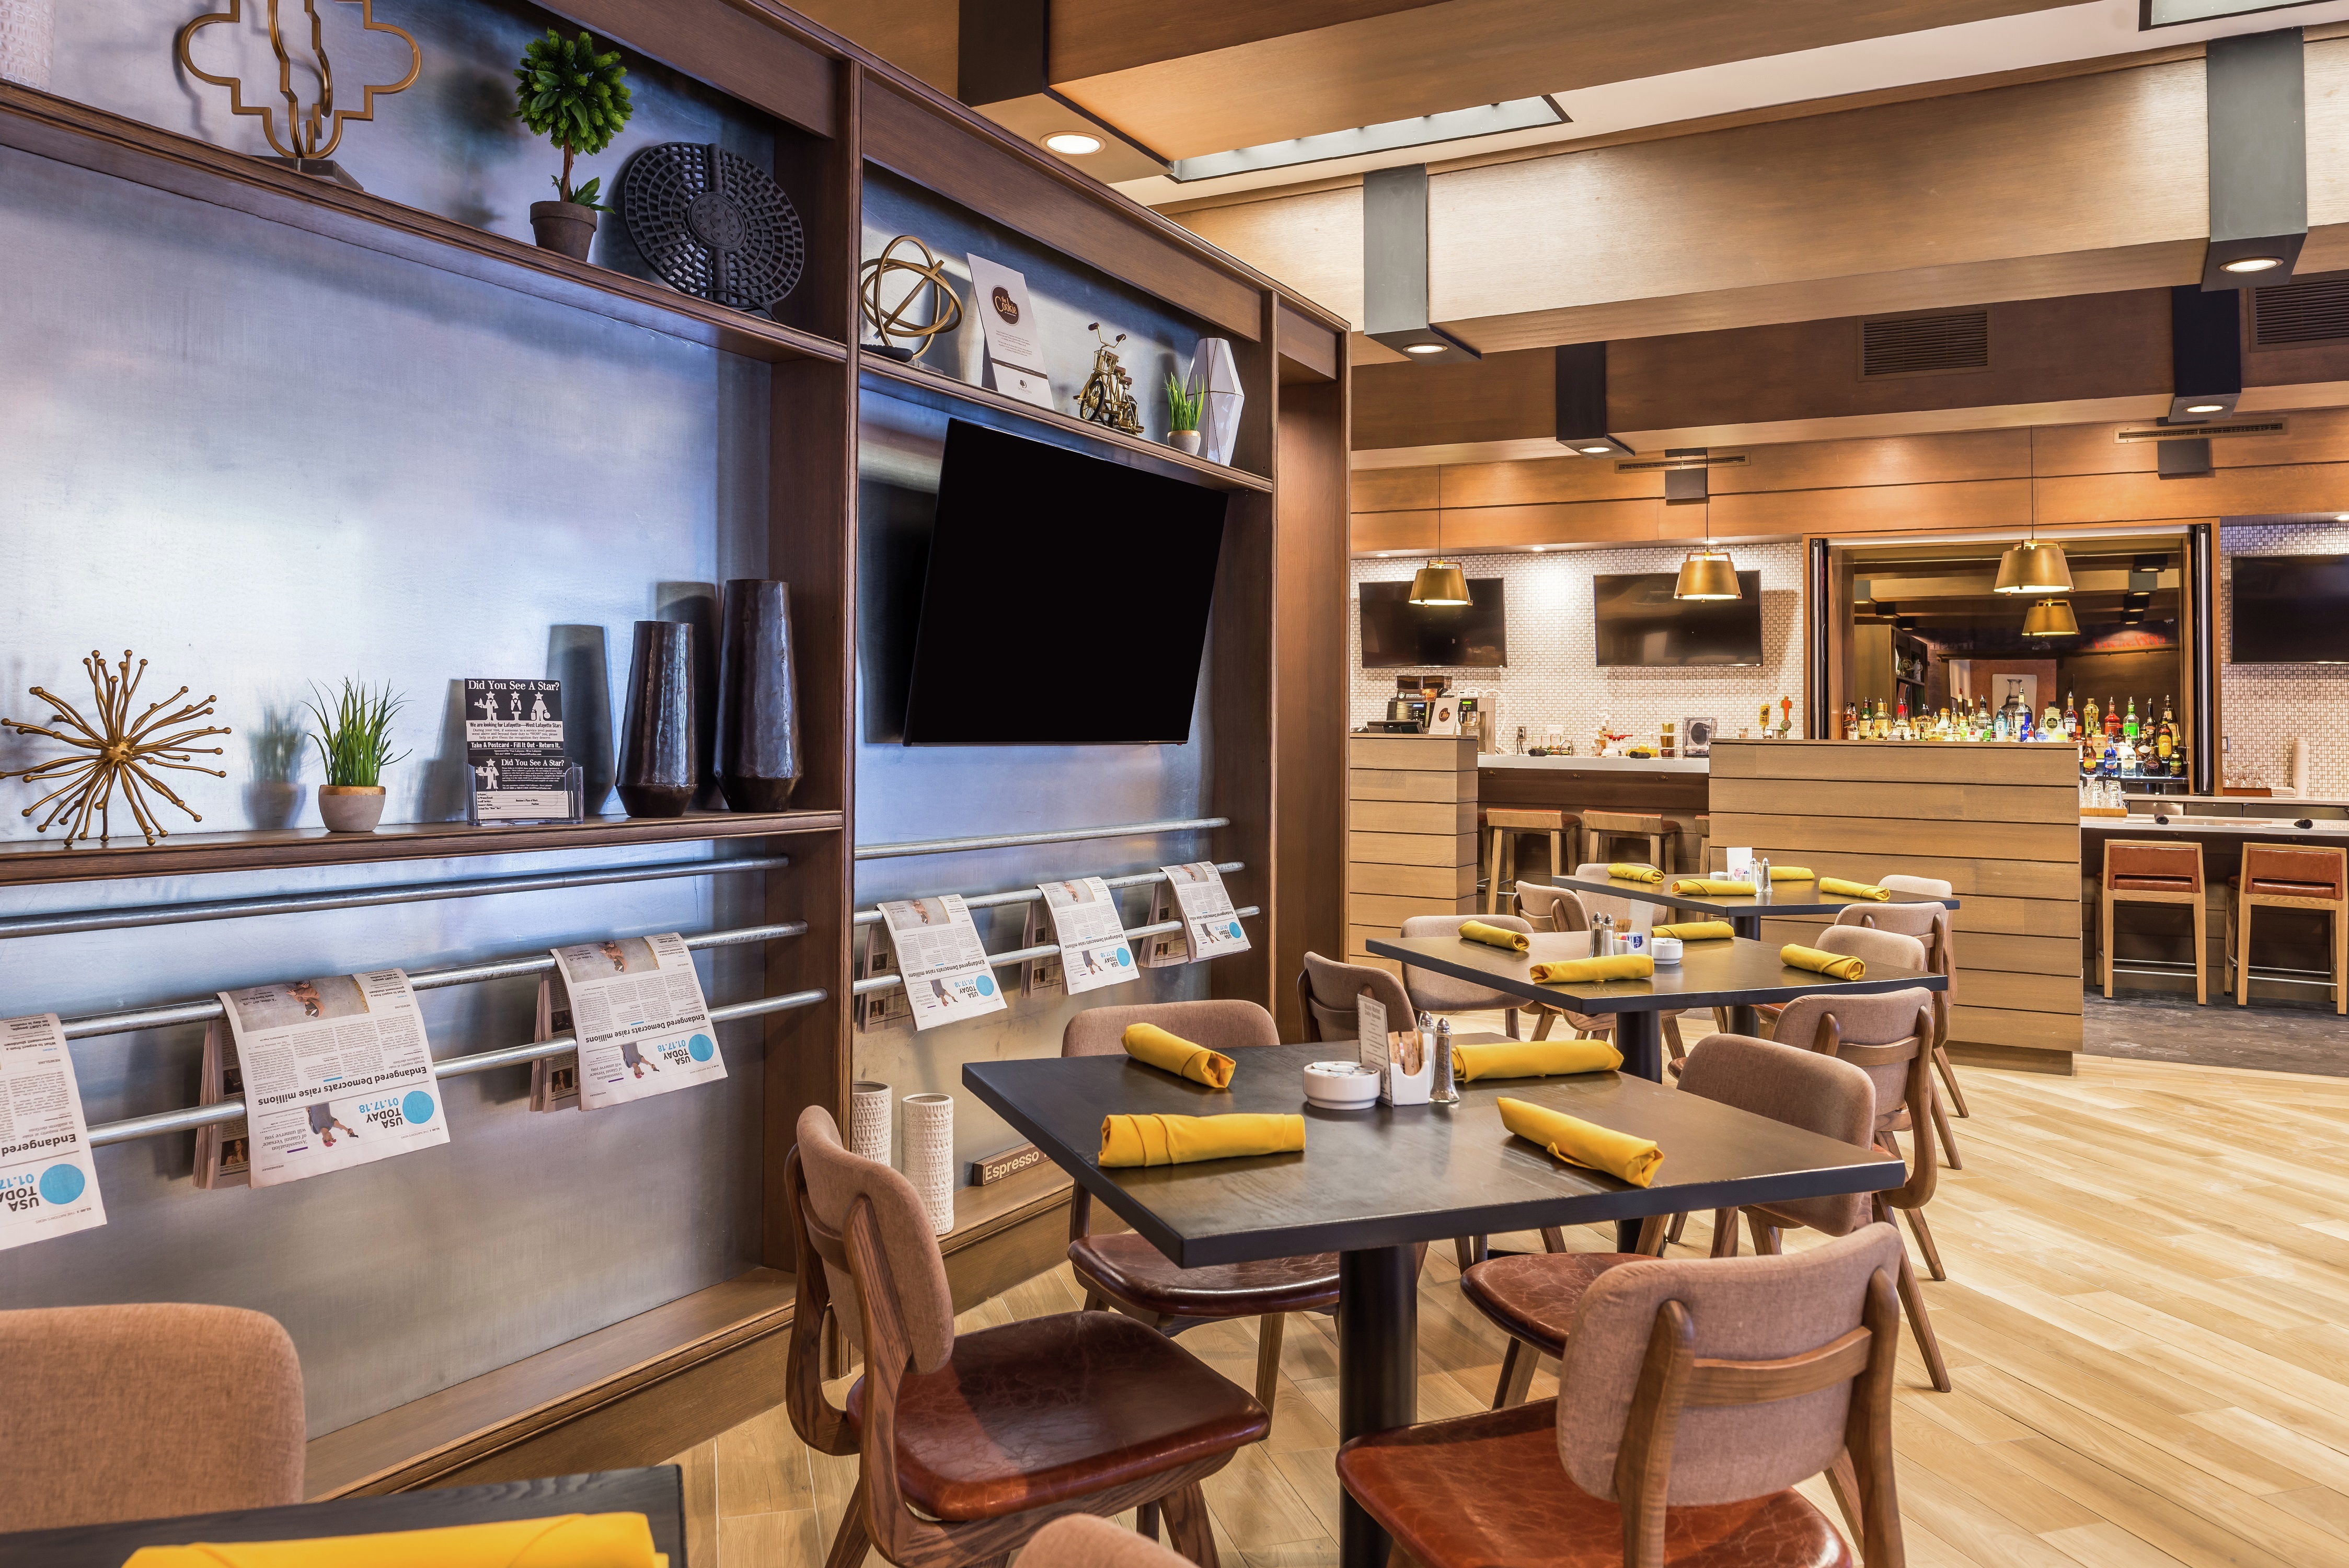 Televisions, Bar, Dining Tables, and Chairs in Made Market Restaurant